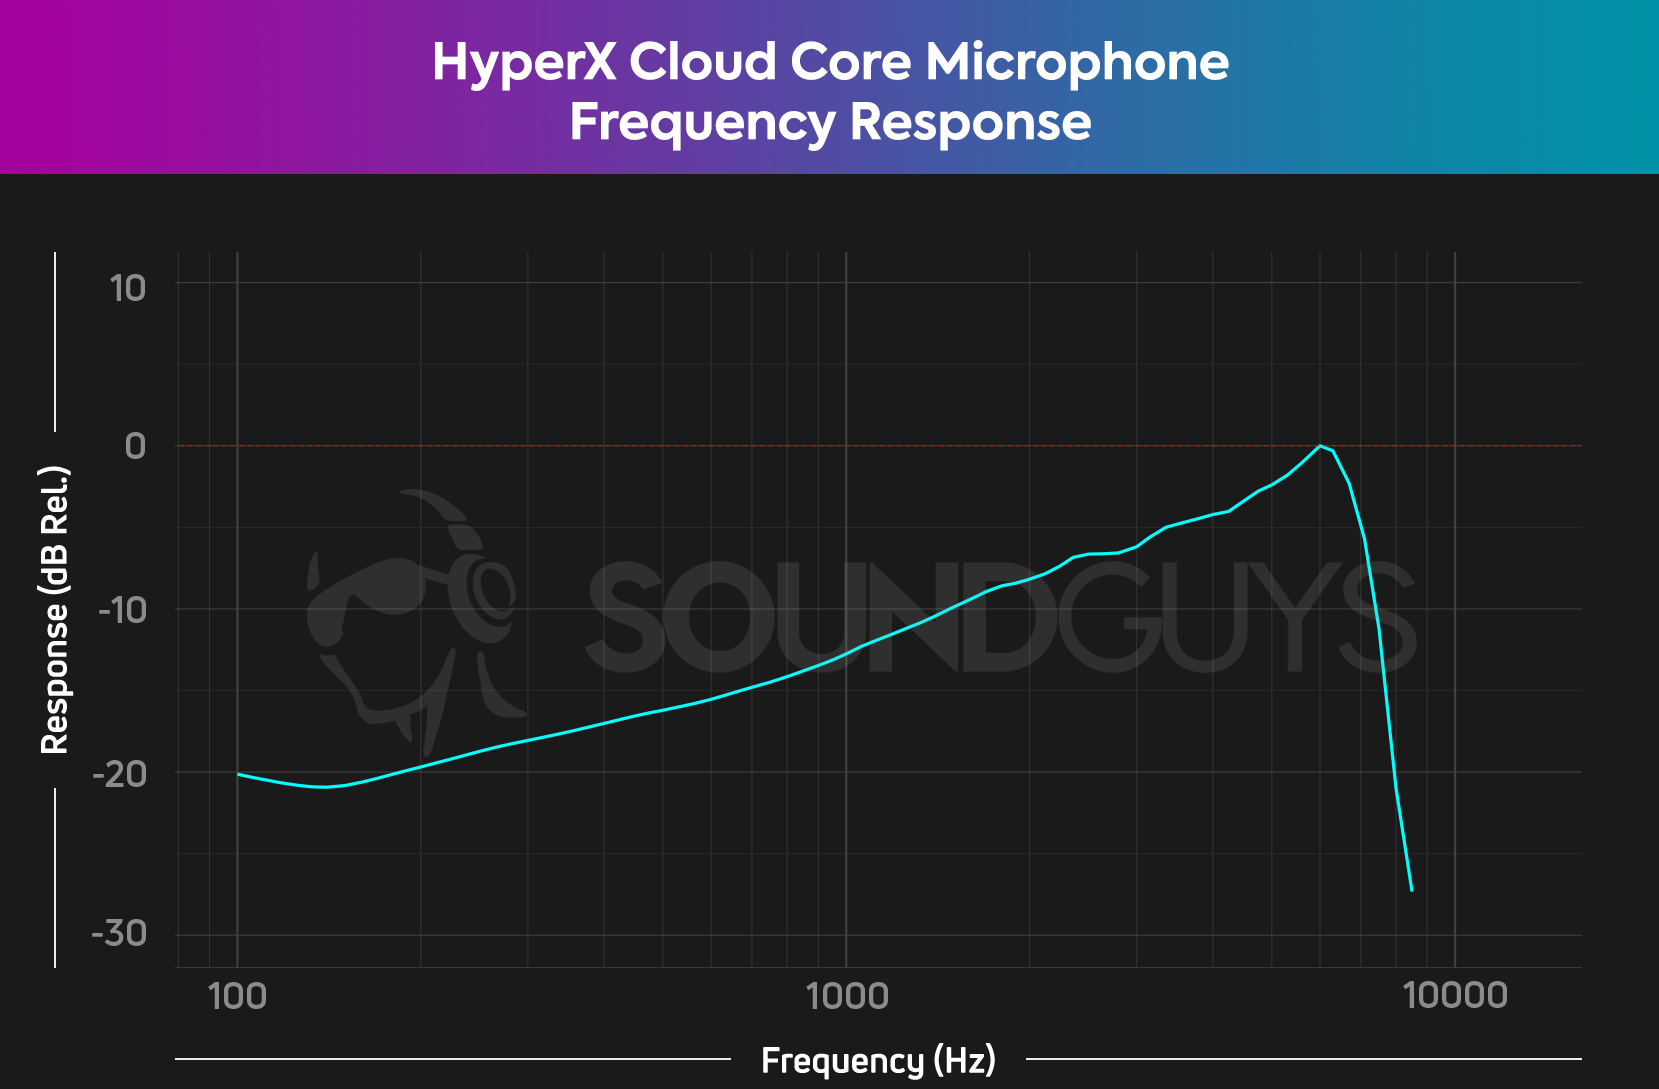 The HyperX Cloud Core microphone frequency response chart showing a poor low end response and a sharp high end cutoff.